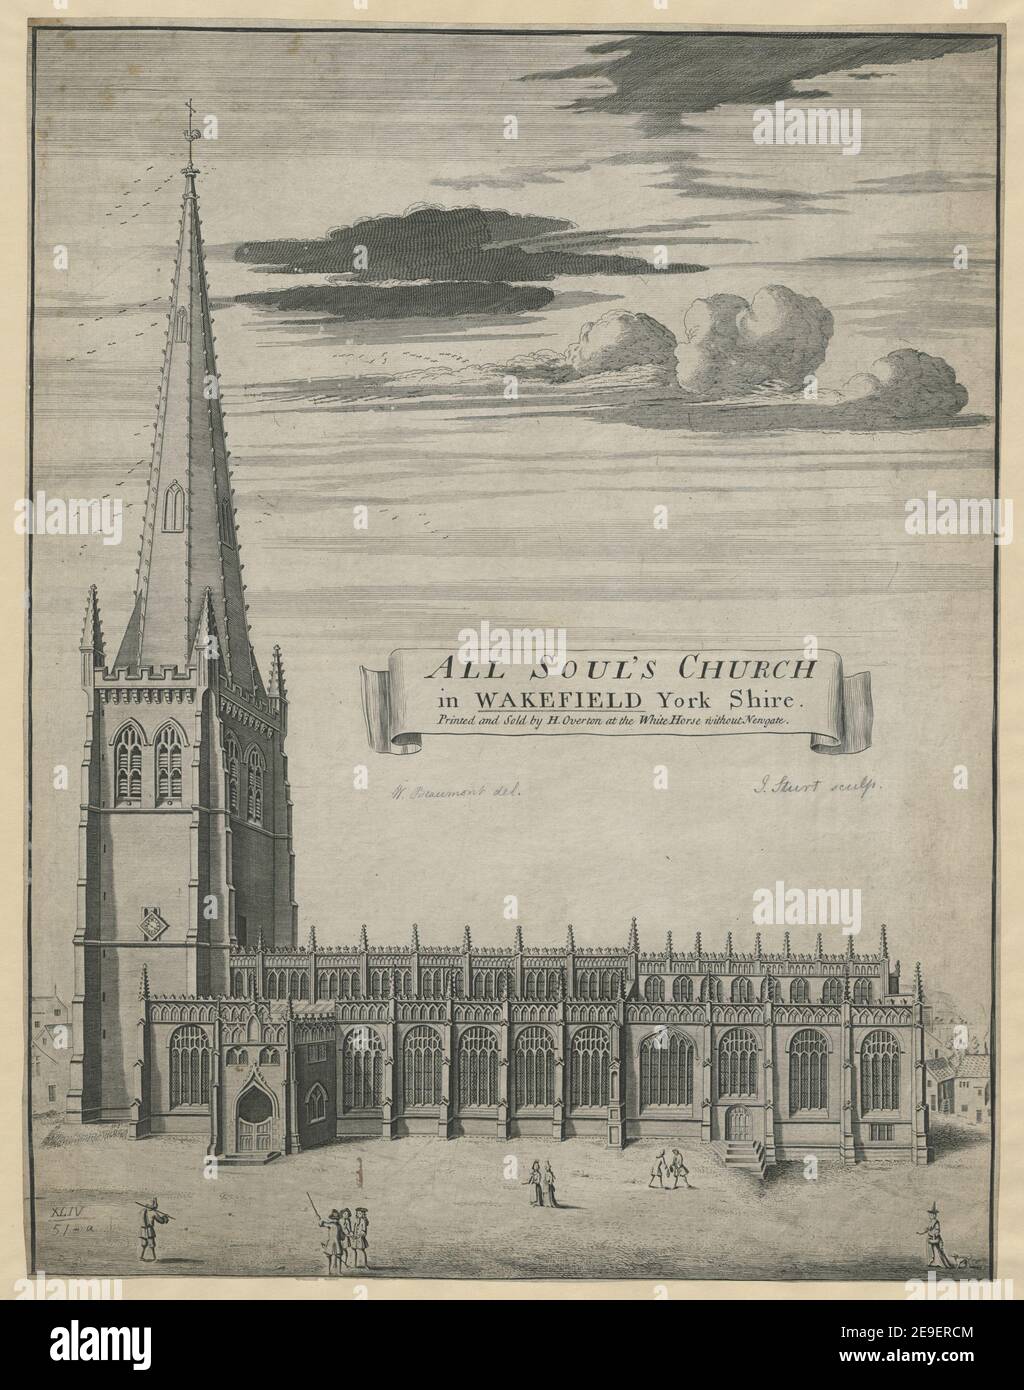 ALL SOUL'S CHURCH in WAKEFIELD York Shire. Author  Sturt, John 44.51. Place of publication: [London] Publisher: Printed and Sold by H. Overton at the White Horse without Newgate., Date of publication: [1720-1740]  Item type: 1 print Medium: etching and engraving Dimensions: sheet 52.0 x 40.3 cm [trimmed within platemark]  Former owner: George III, King of Great Britain, 1738-1820 Stock Photo